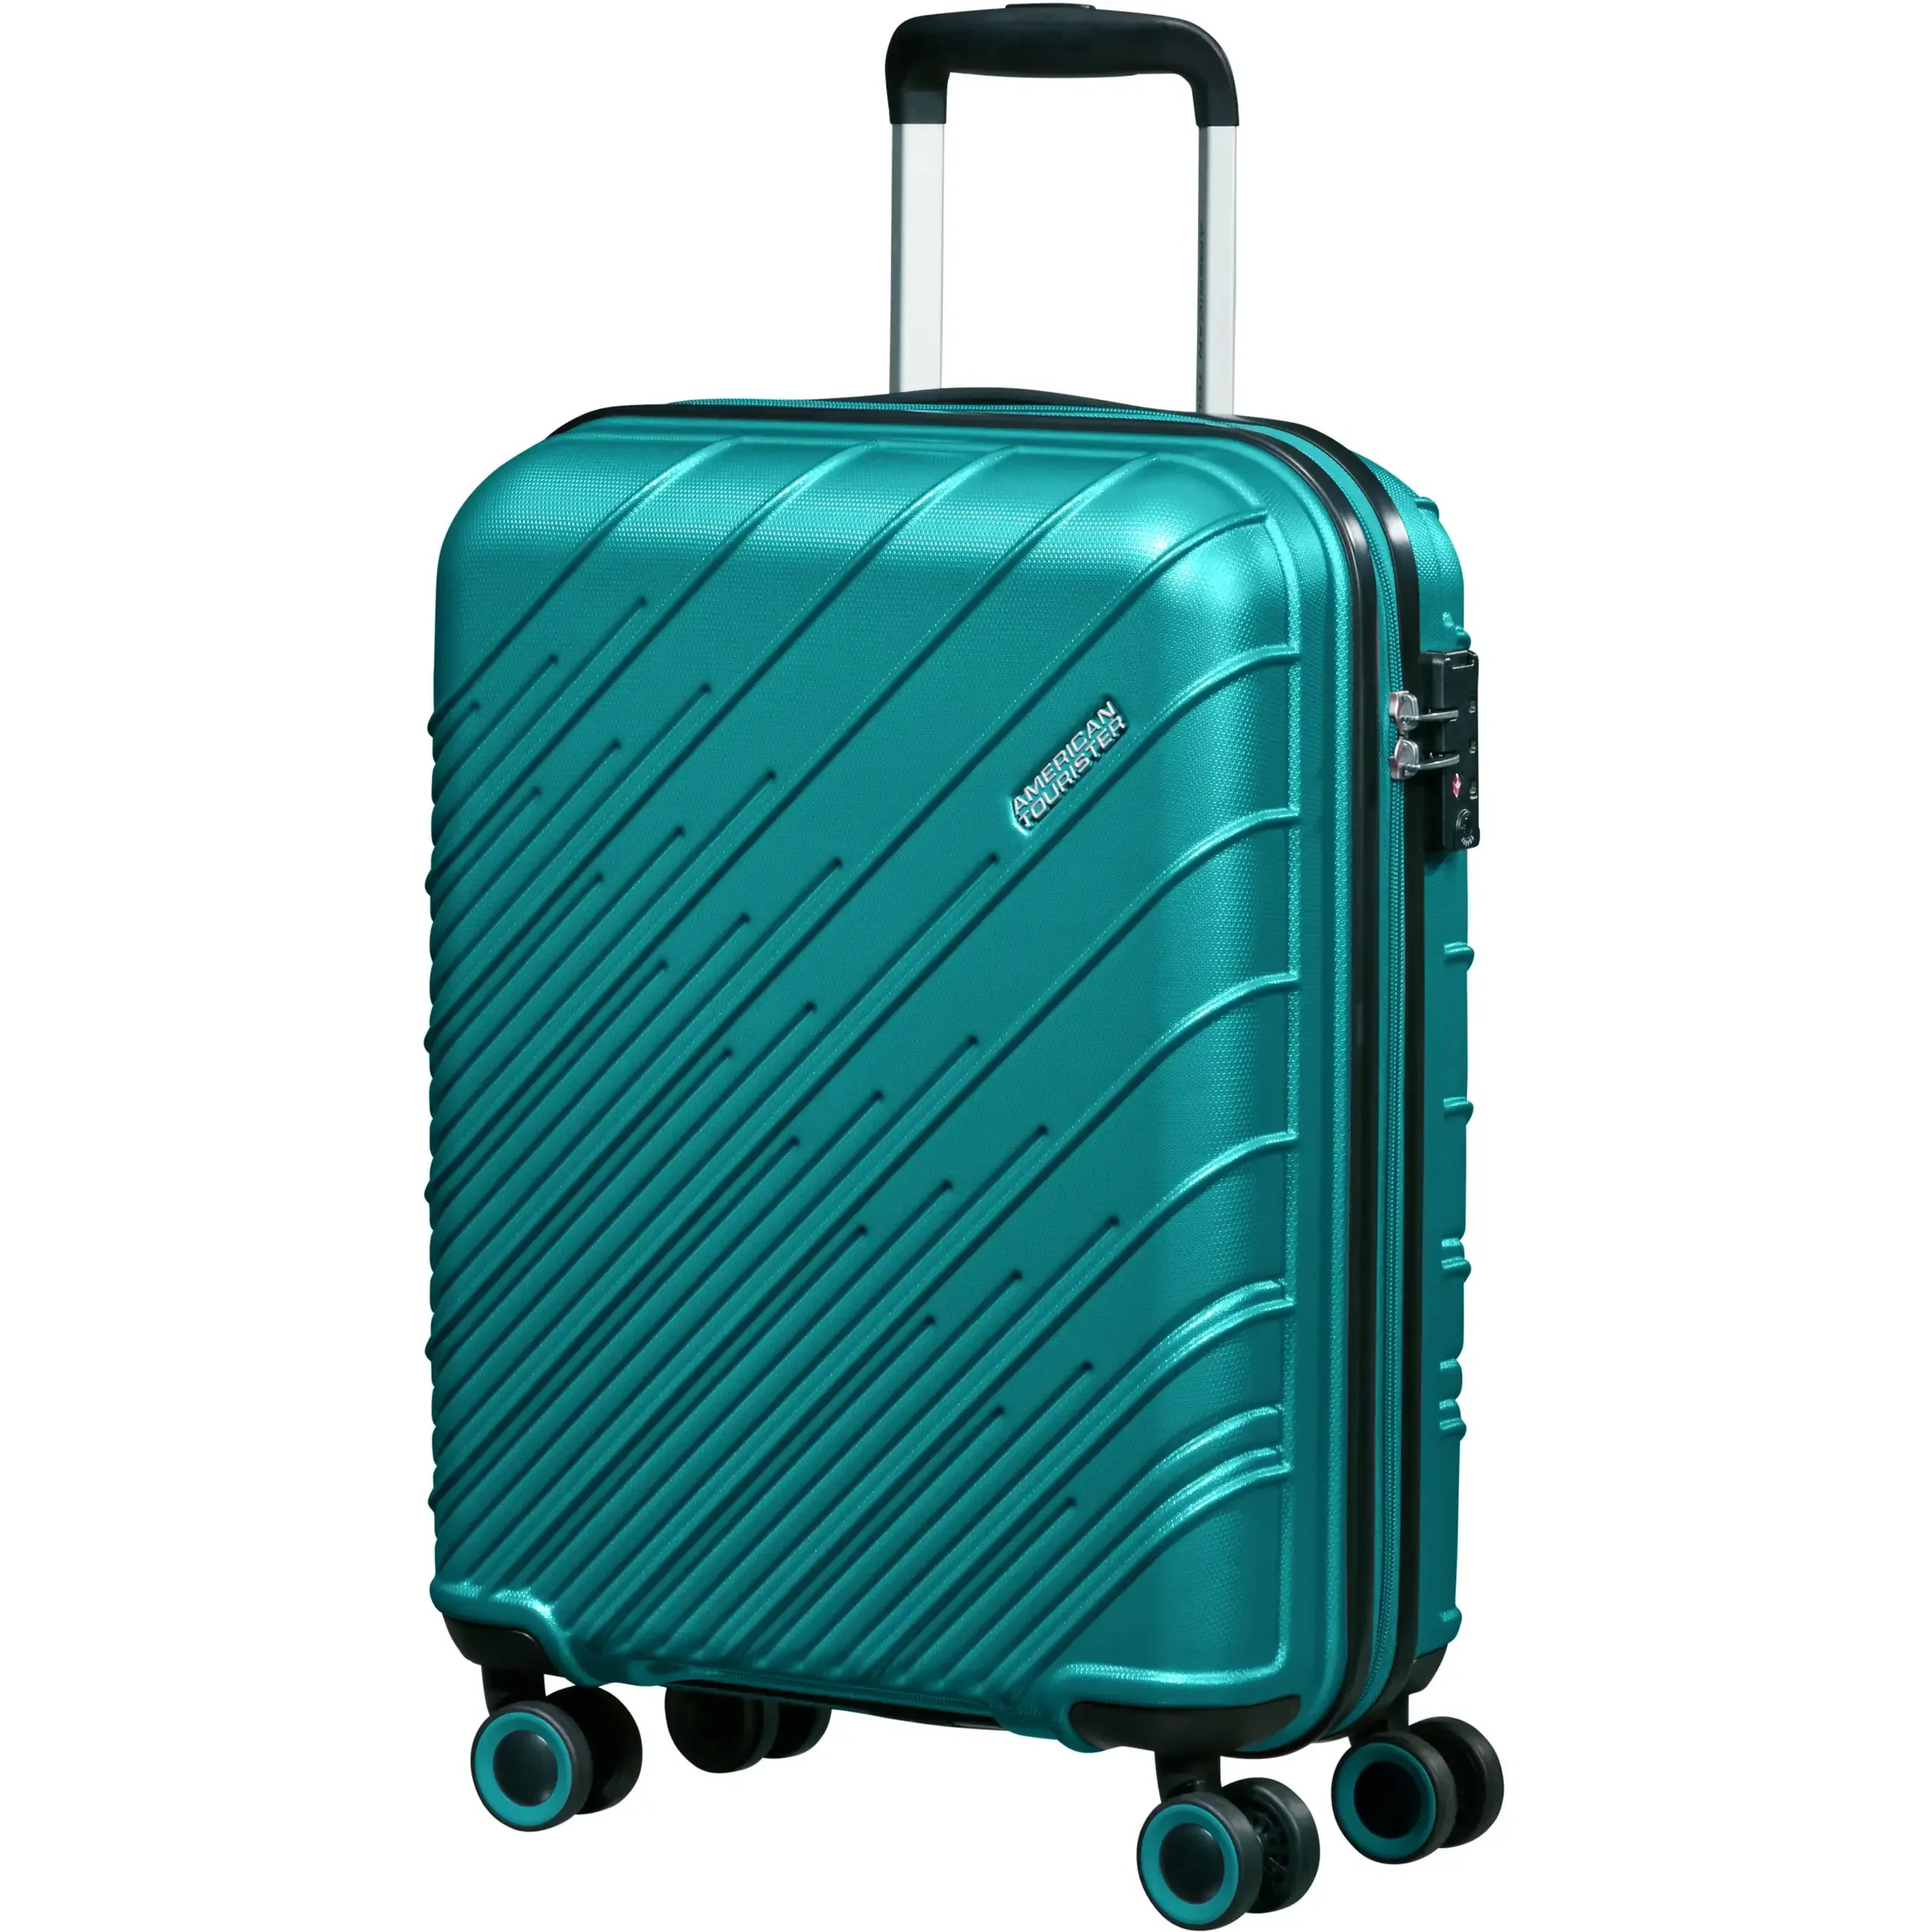 American Tourister Speedstar Spinner trolley cabine 4 roues 55 cm - turquoise profond